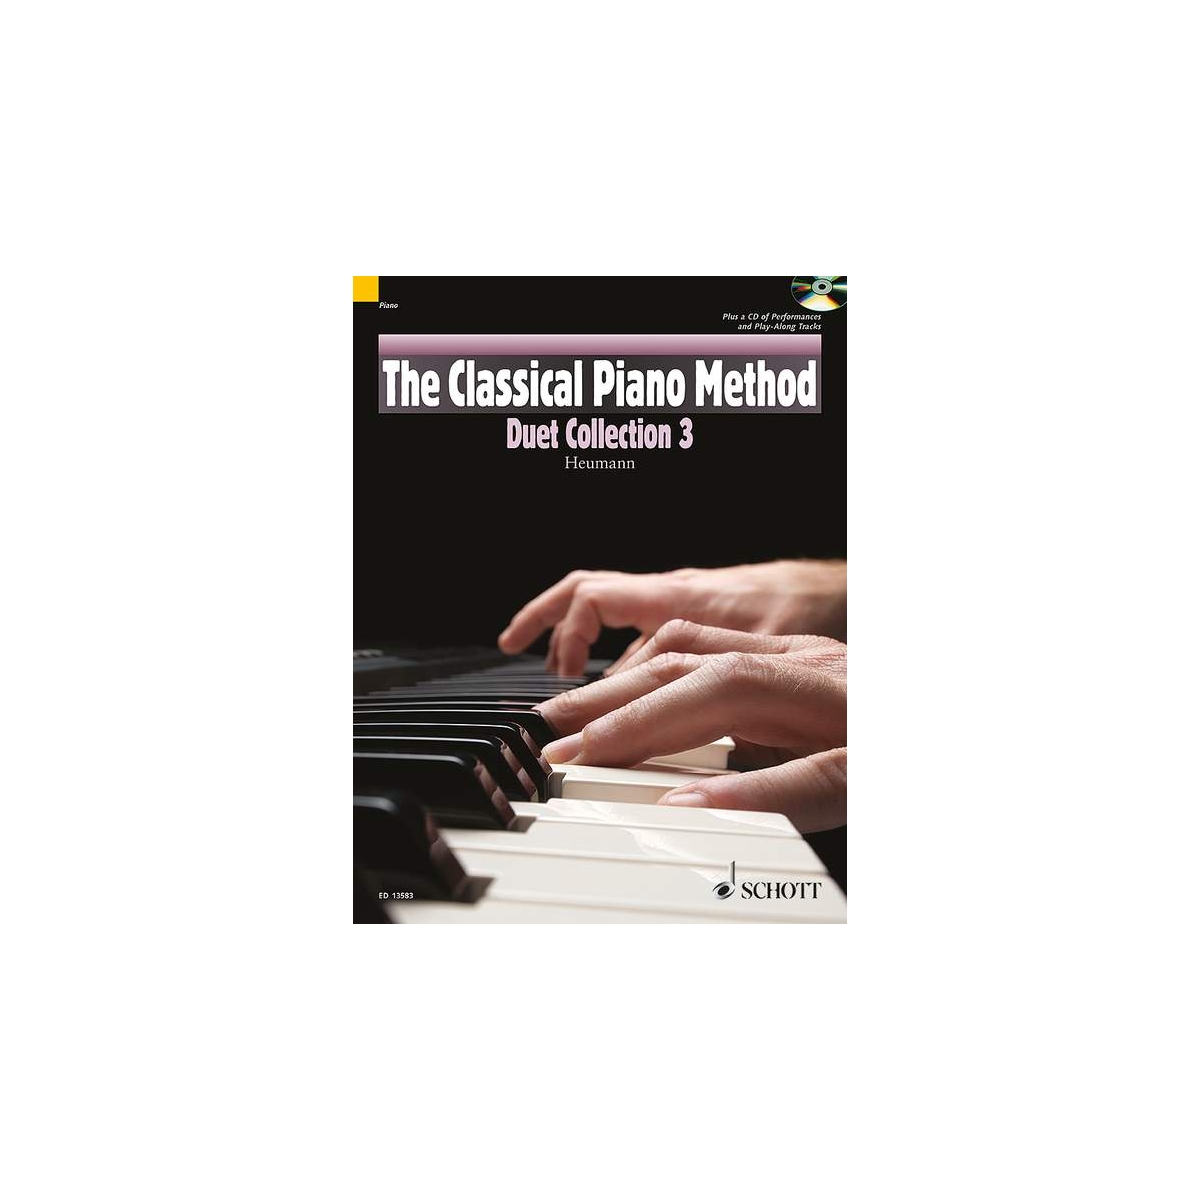 The Classical Piano Method - Duet Collection 3